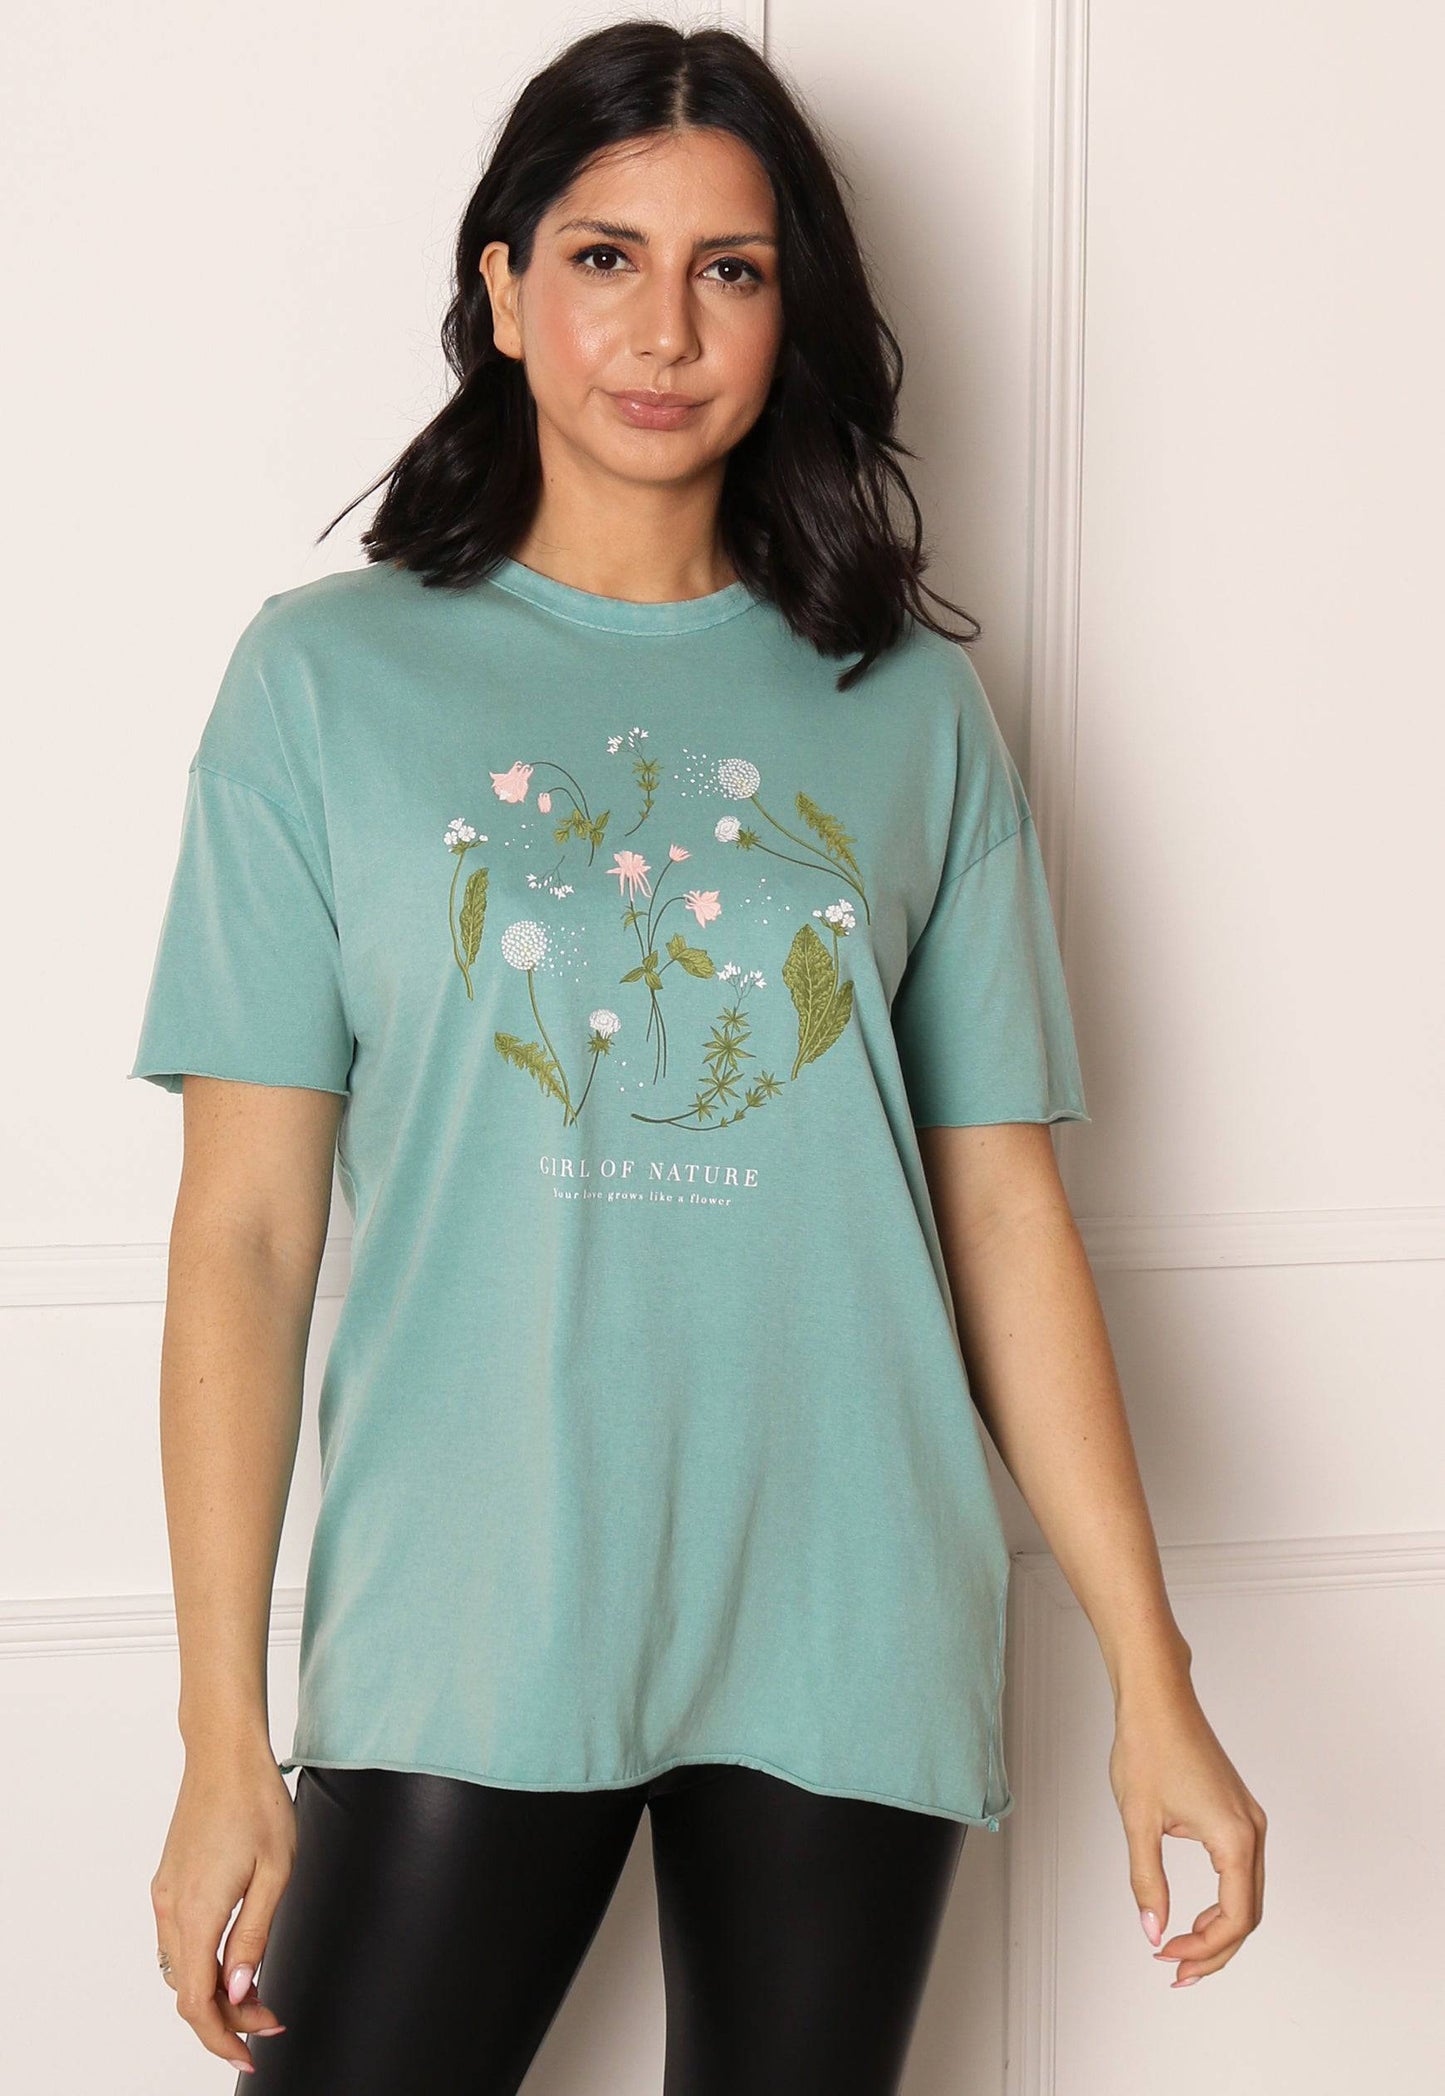 ONLY Lucy Botanical Flower Graphic Tee in Washed Turquoise - concretebartops